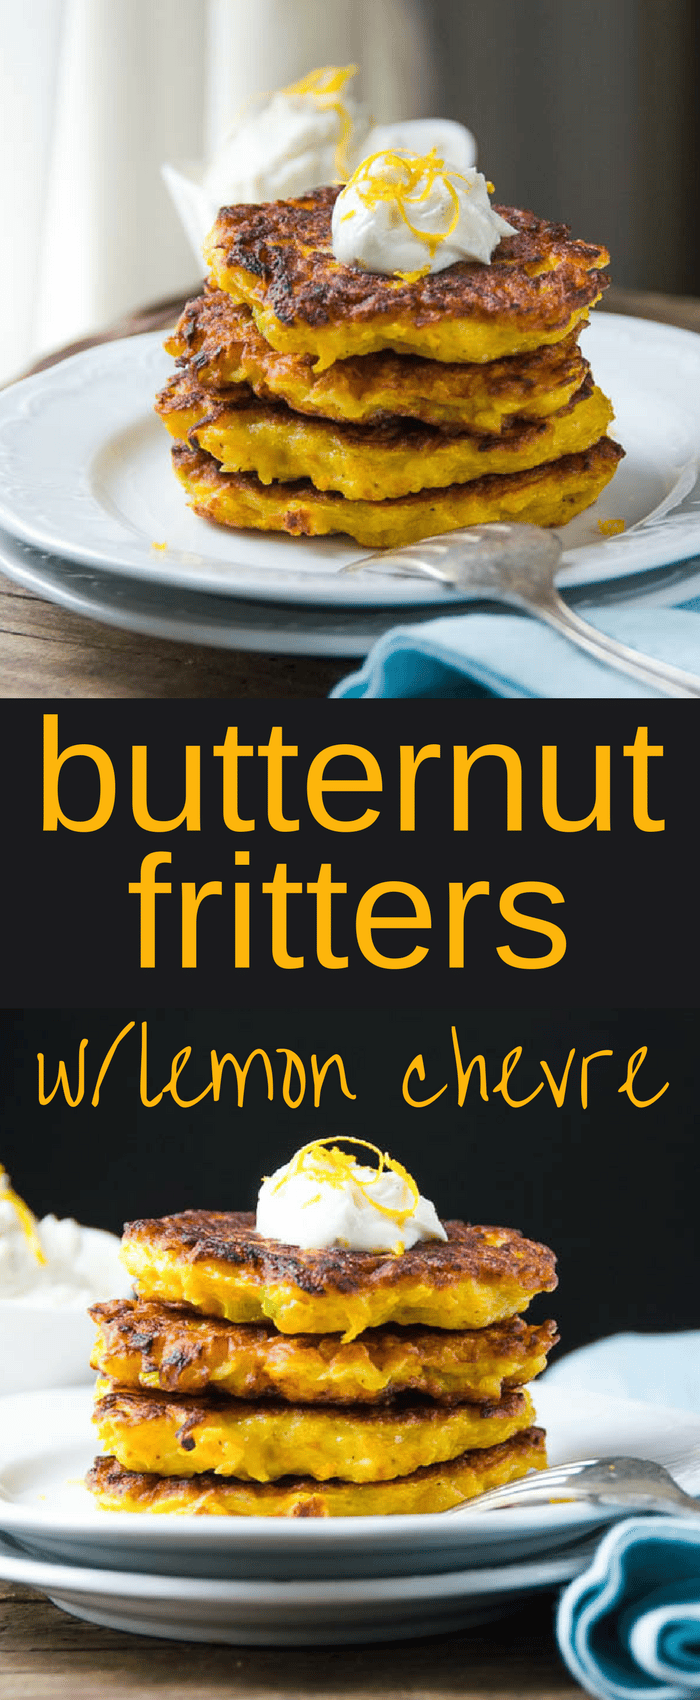 This easy recipe for butternut fritters with lemon chevre make an excellent appetizer or a delicious vegetarian side dish to any meal. Great for holidays! #sidedish #vegetarian #butternutsquash #fritters #christmasdinner #thanksgivingdinner #holidaydinner #squash #butternut #chevre #goatcheese #vegetablefritter